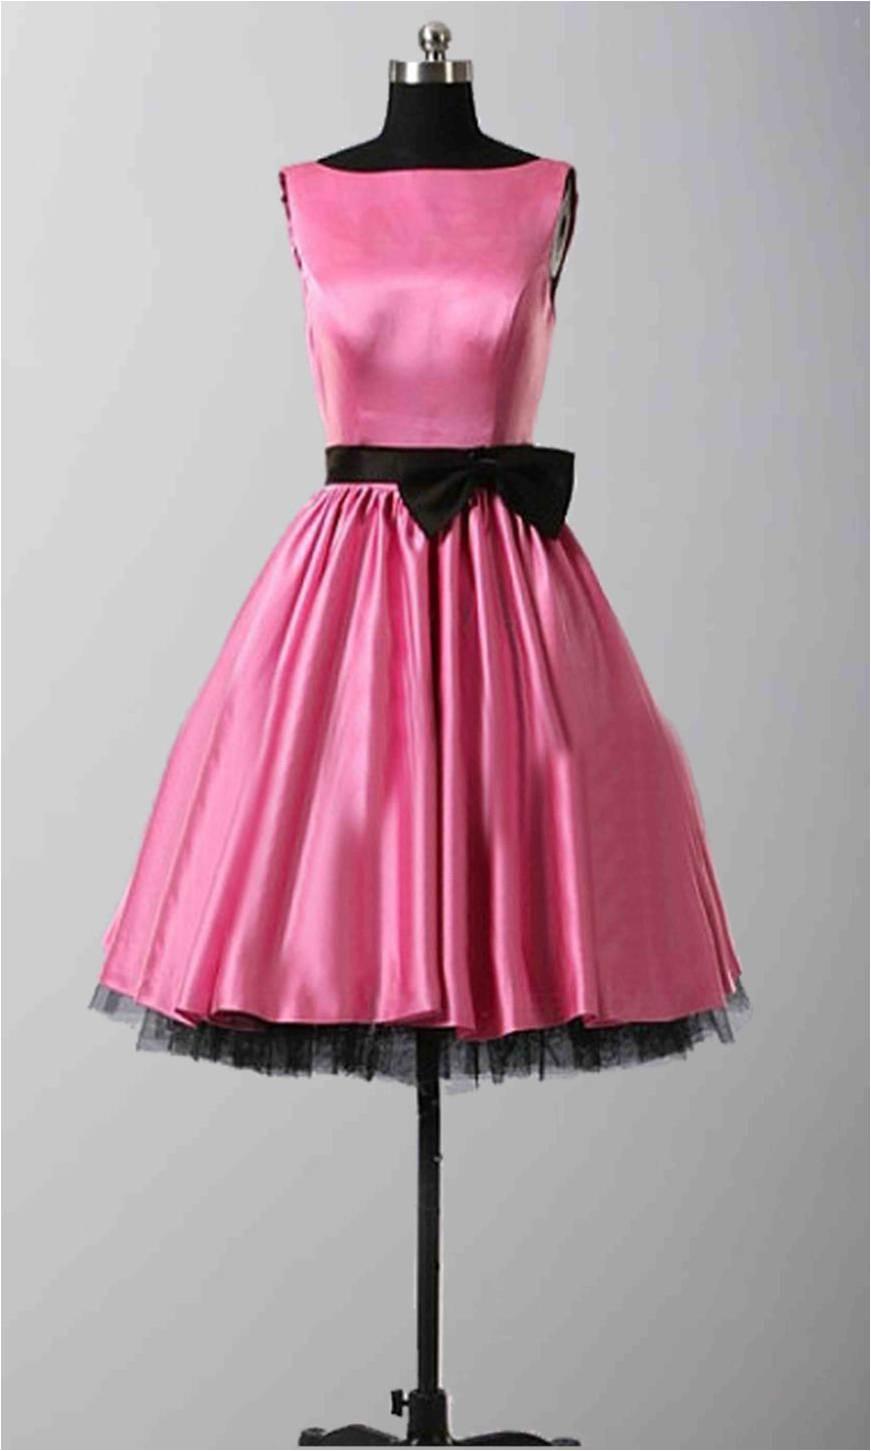 Mariage - Bateau Pink Short Satin BowKnot Retro Bridesmaid Gowns KSP278 [KSP278] - £85.00 : Cheap Prom Dresses Uk, Bridesmaid Dresses, 2014 Prom & Evening Dresses, Look for cheap elegant prom dresses 2014, cocktail gowns, or dresses for special occasions? kissprom.